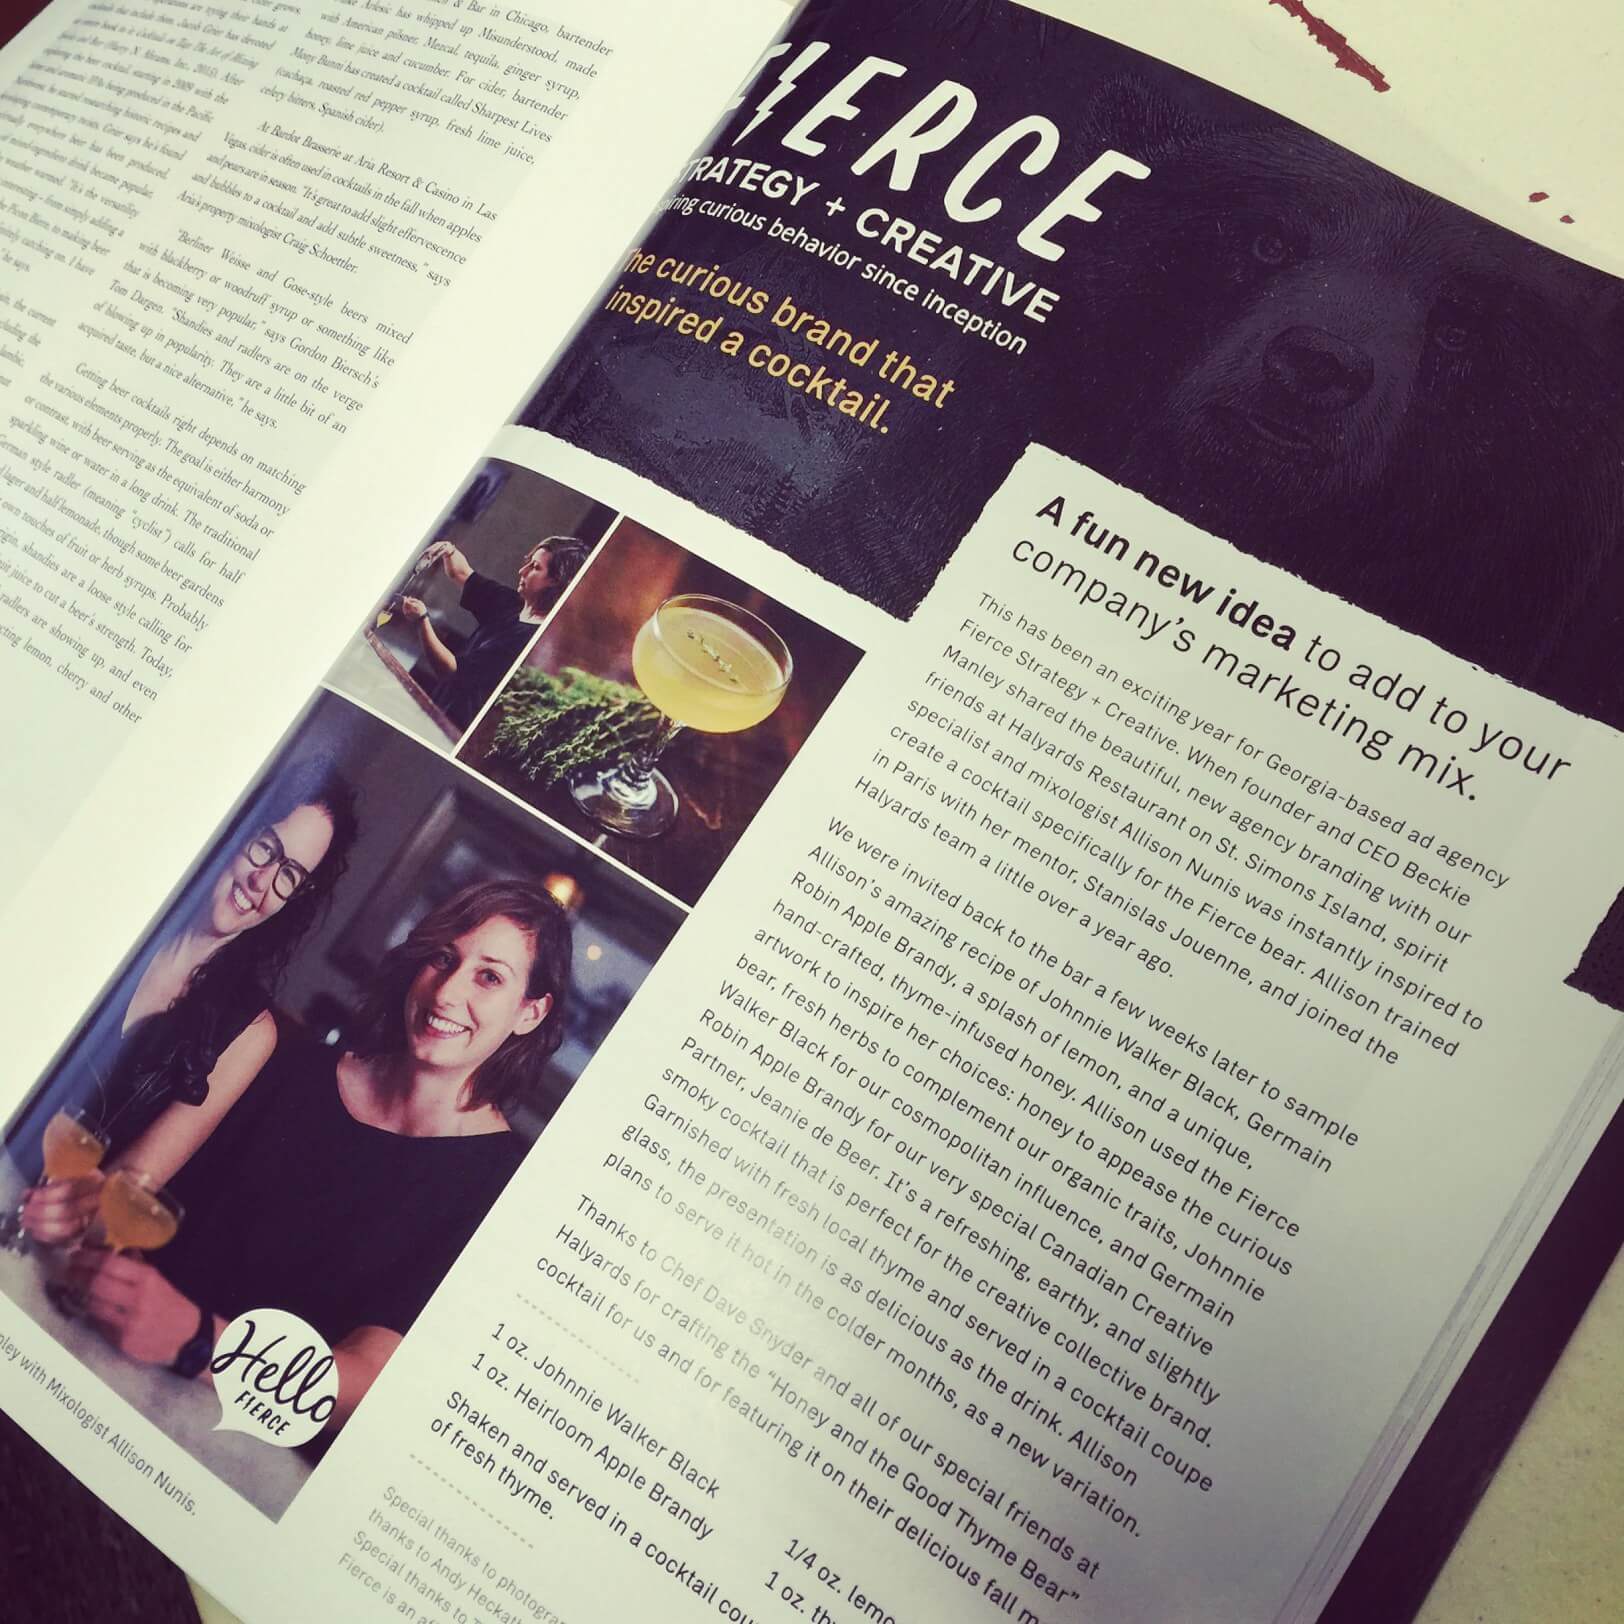 Honey and the Good Thyme Bear featured in “In the Mix” Magazine.